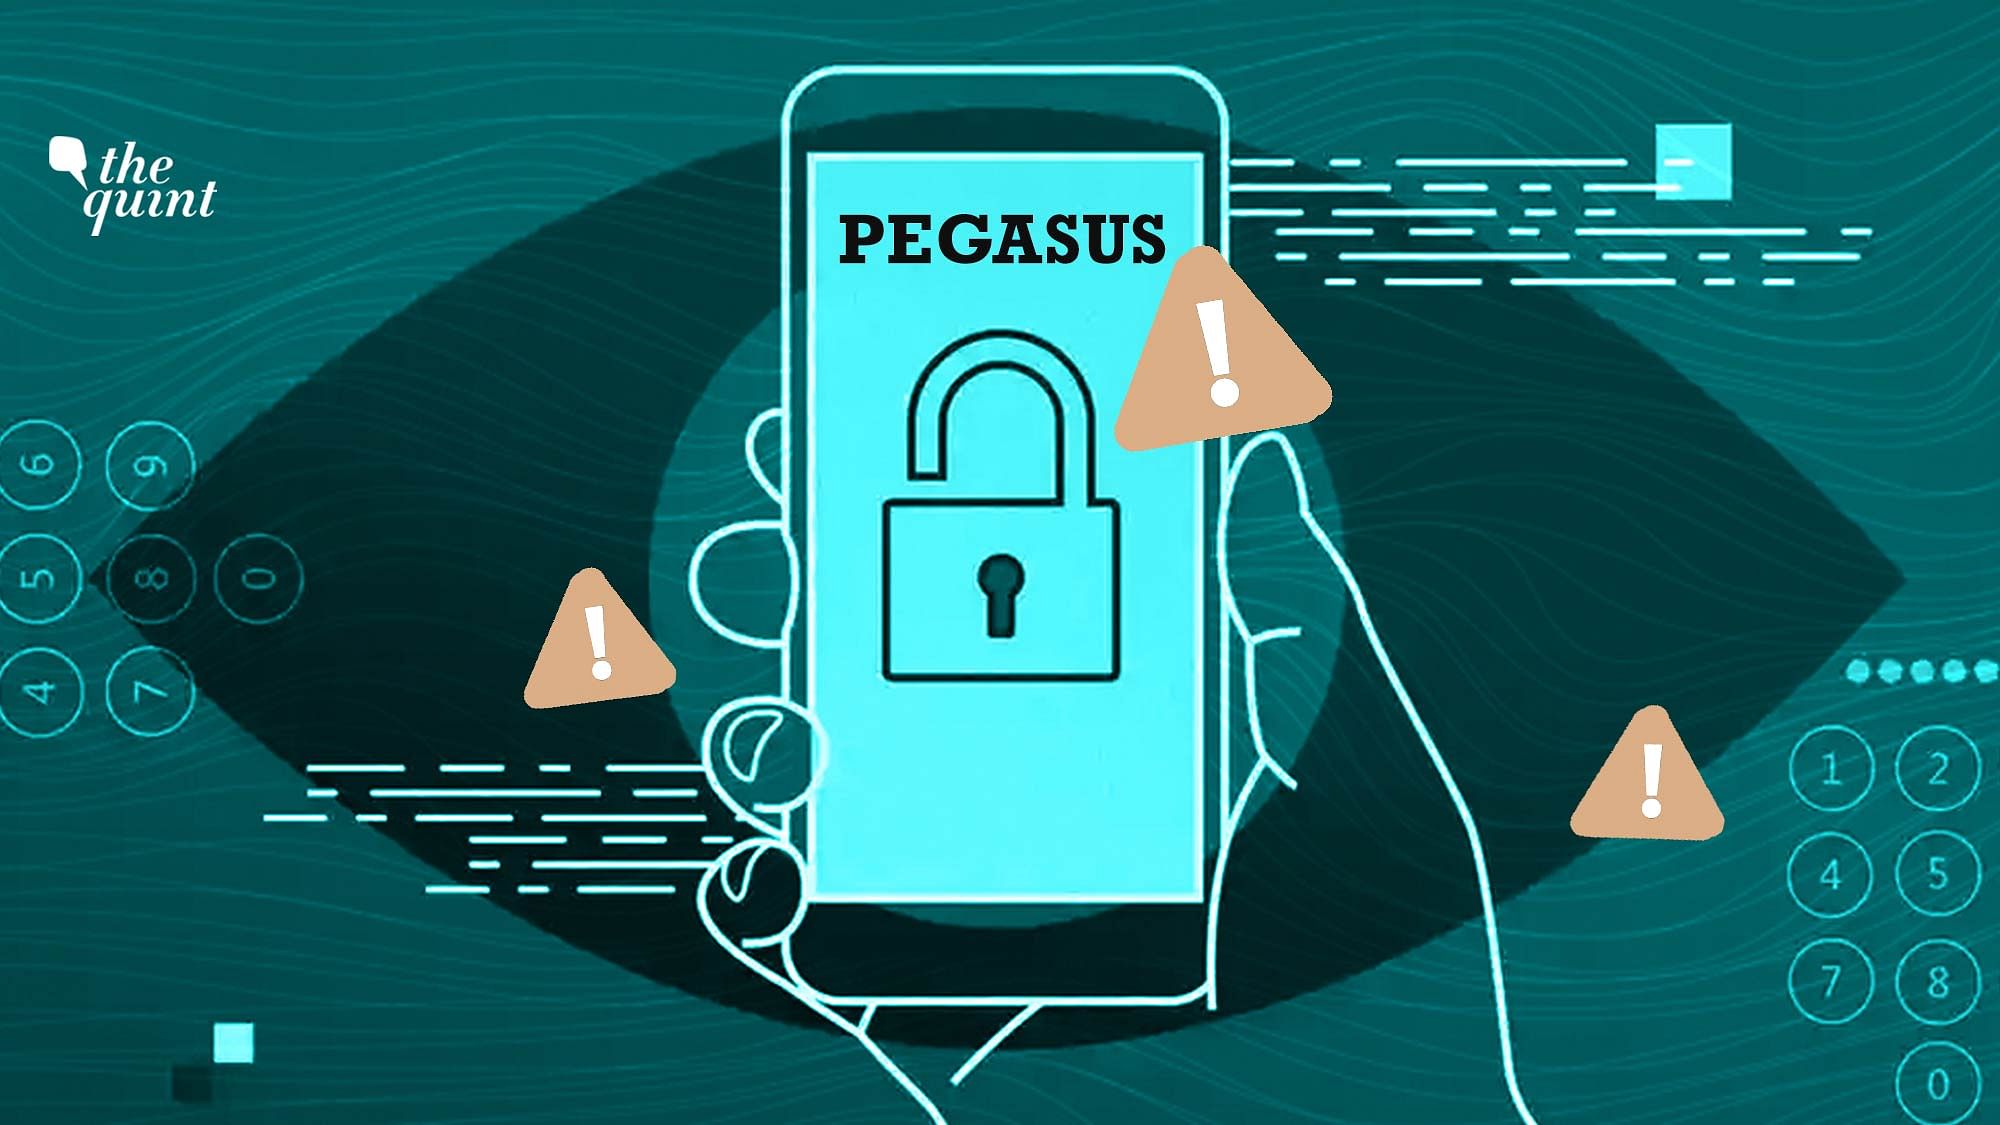 <div class="paragraphs"><p>Israeli company NSO Group is behind the Pegasus spyware, which has created a huge storm over potential surveillance.</p></div>